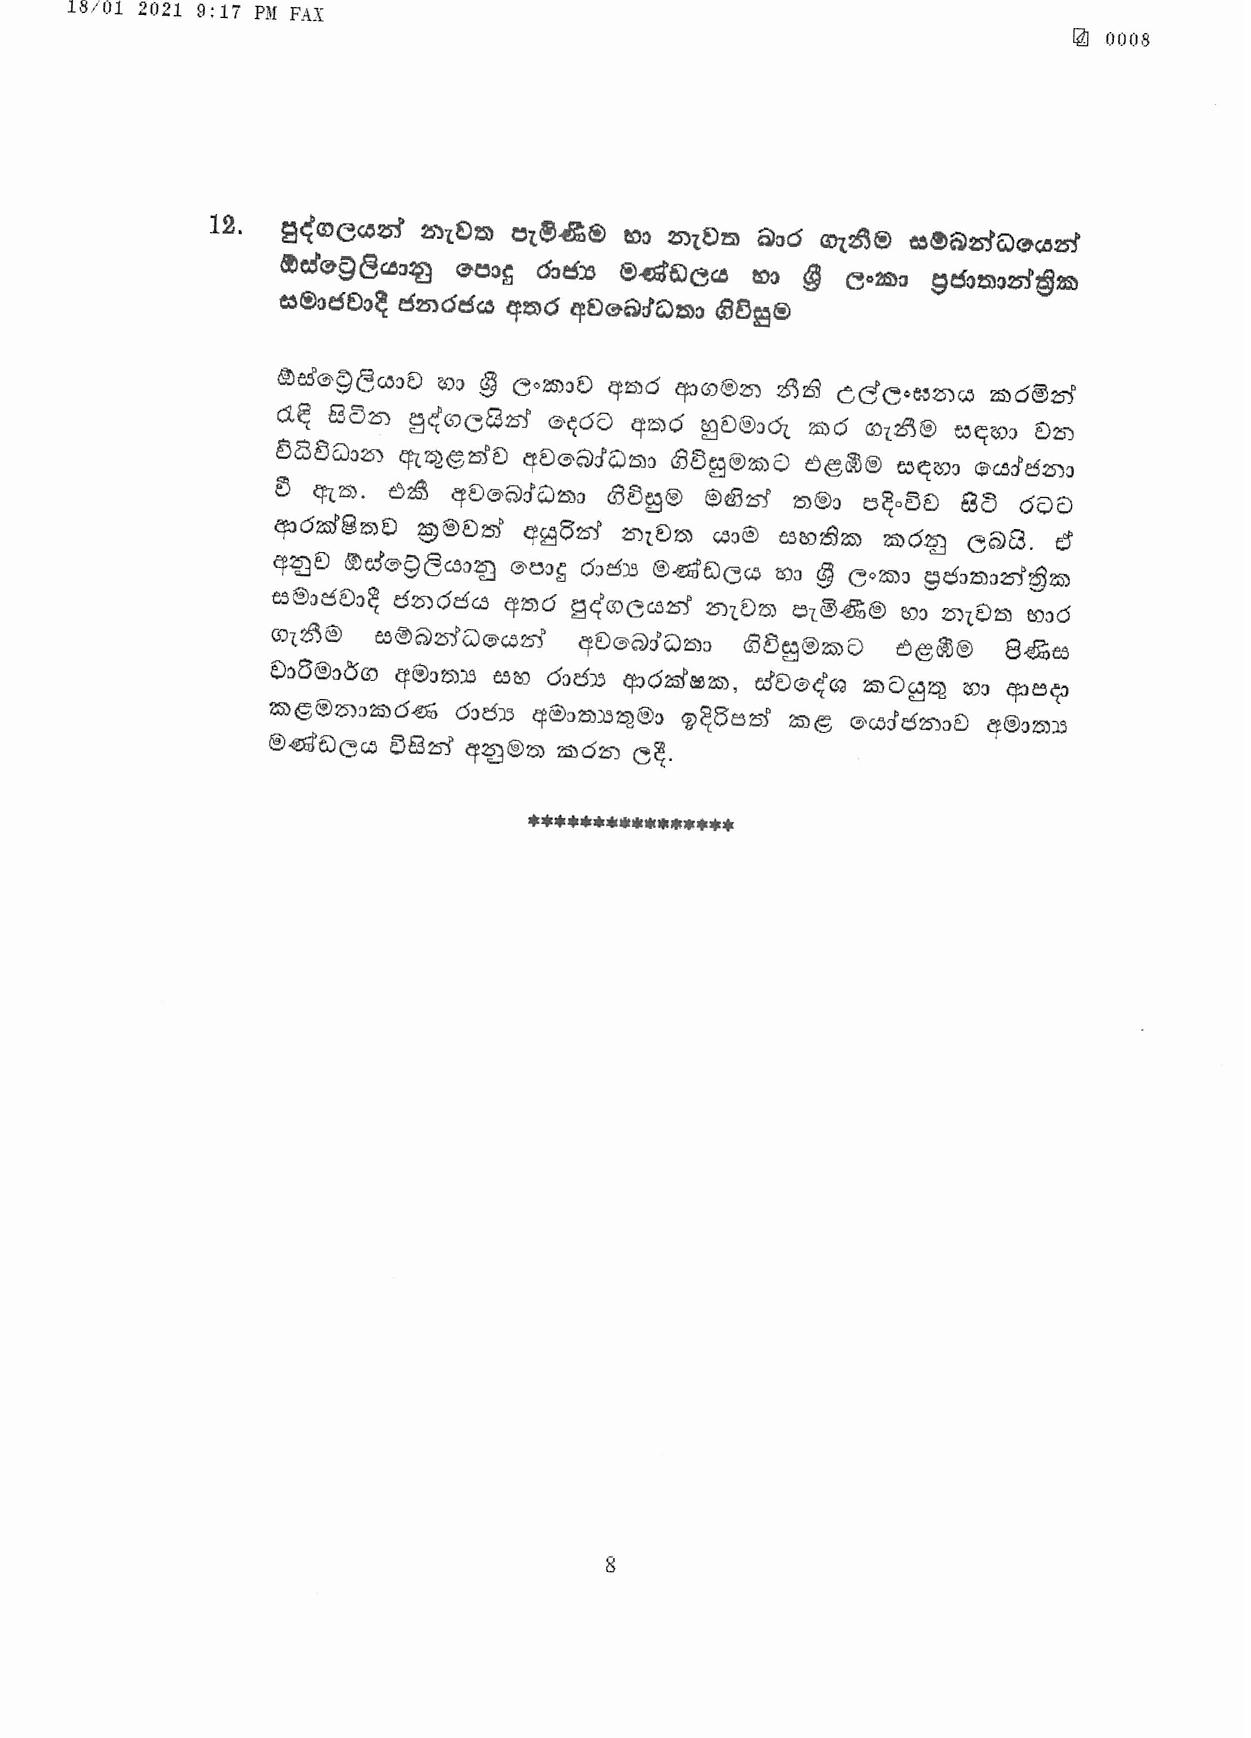 Cabinet Decision on 18.01.2021 page 008